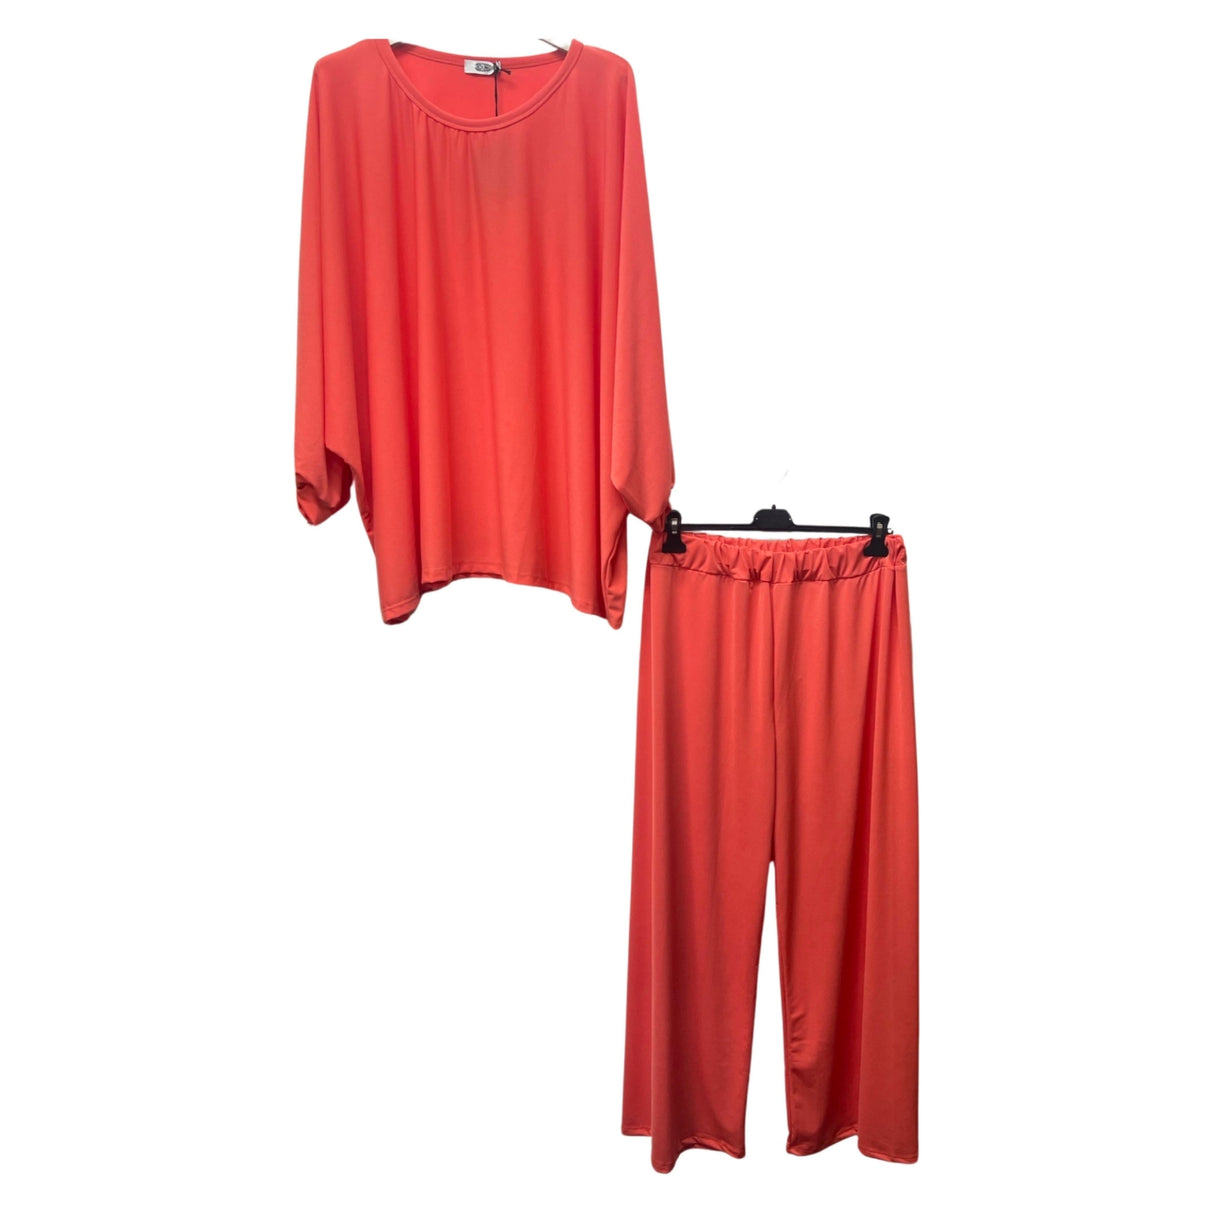 SPRING CO-ORD SET COCOON SHAPE TOP & HIGH WAIST WIDE LEG PANTS ONE SIZE FITS ALL UK SIZE 10-24